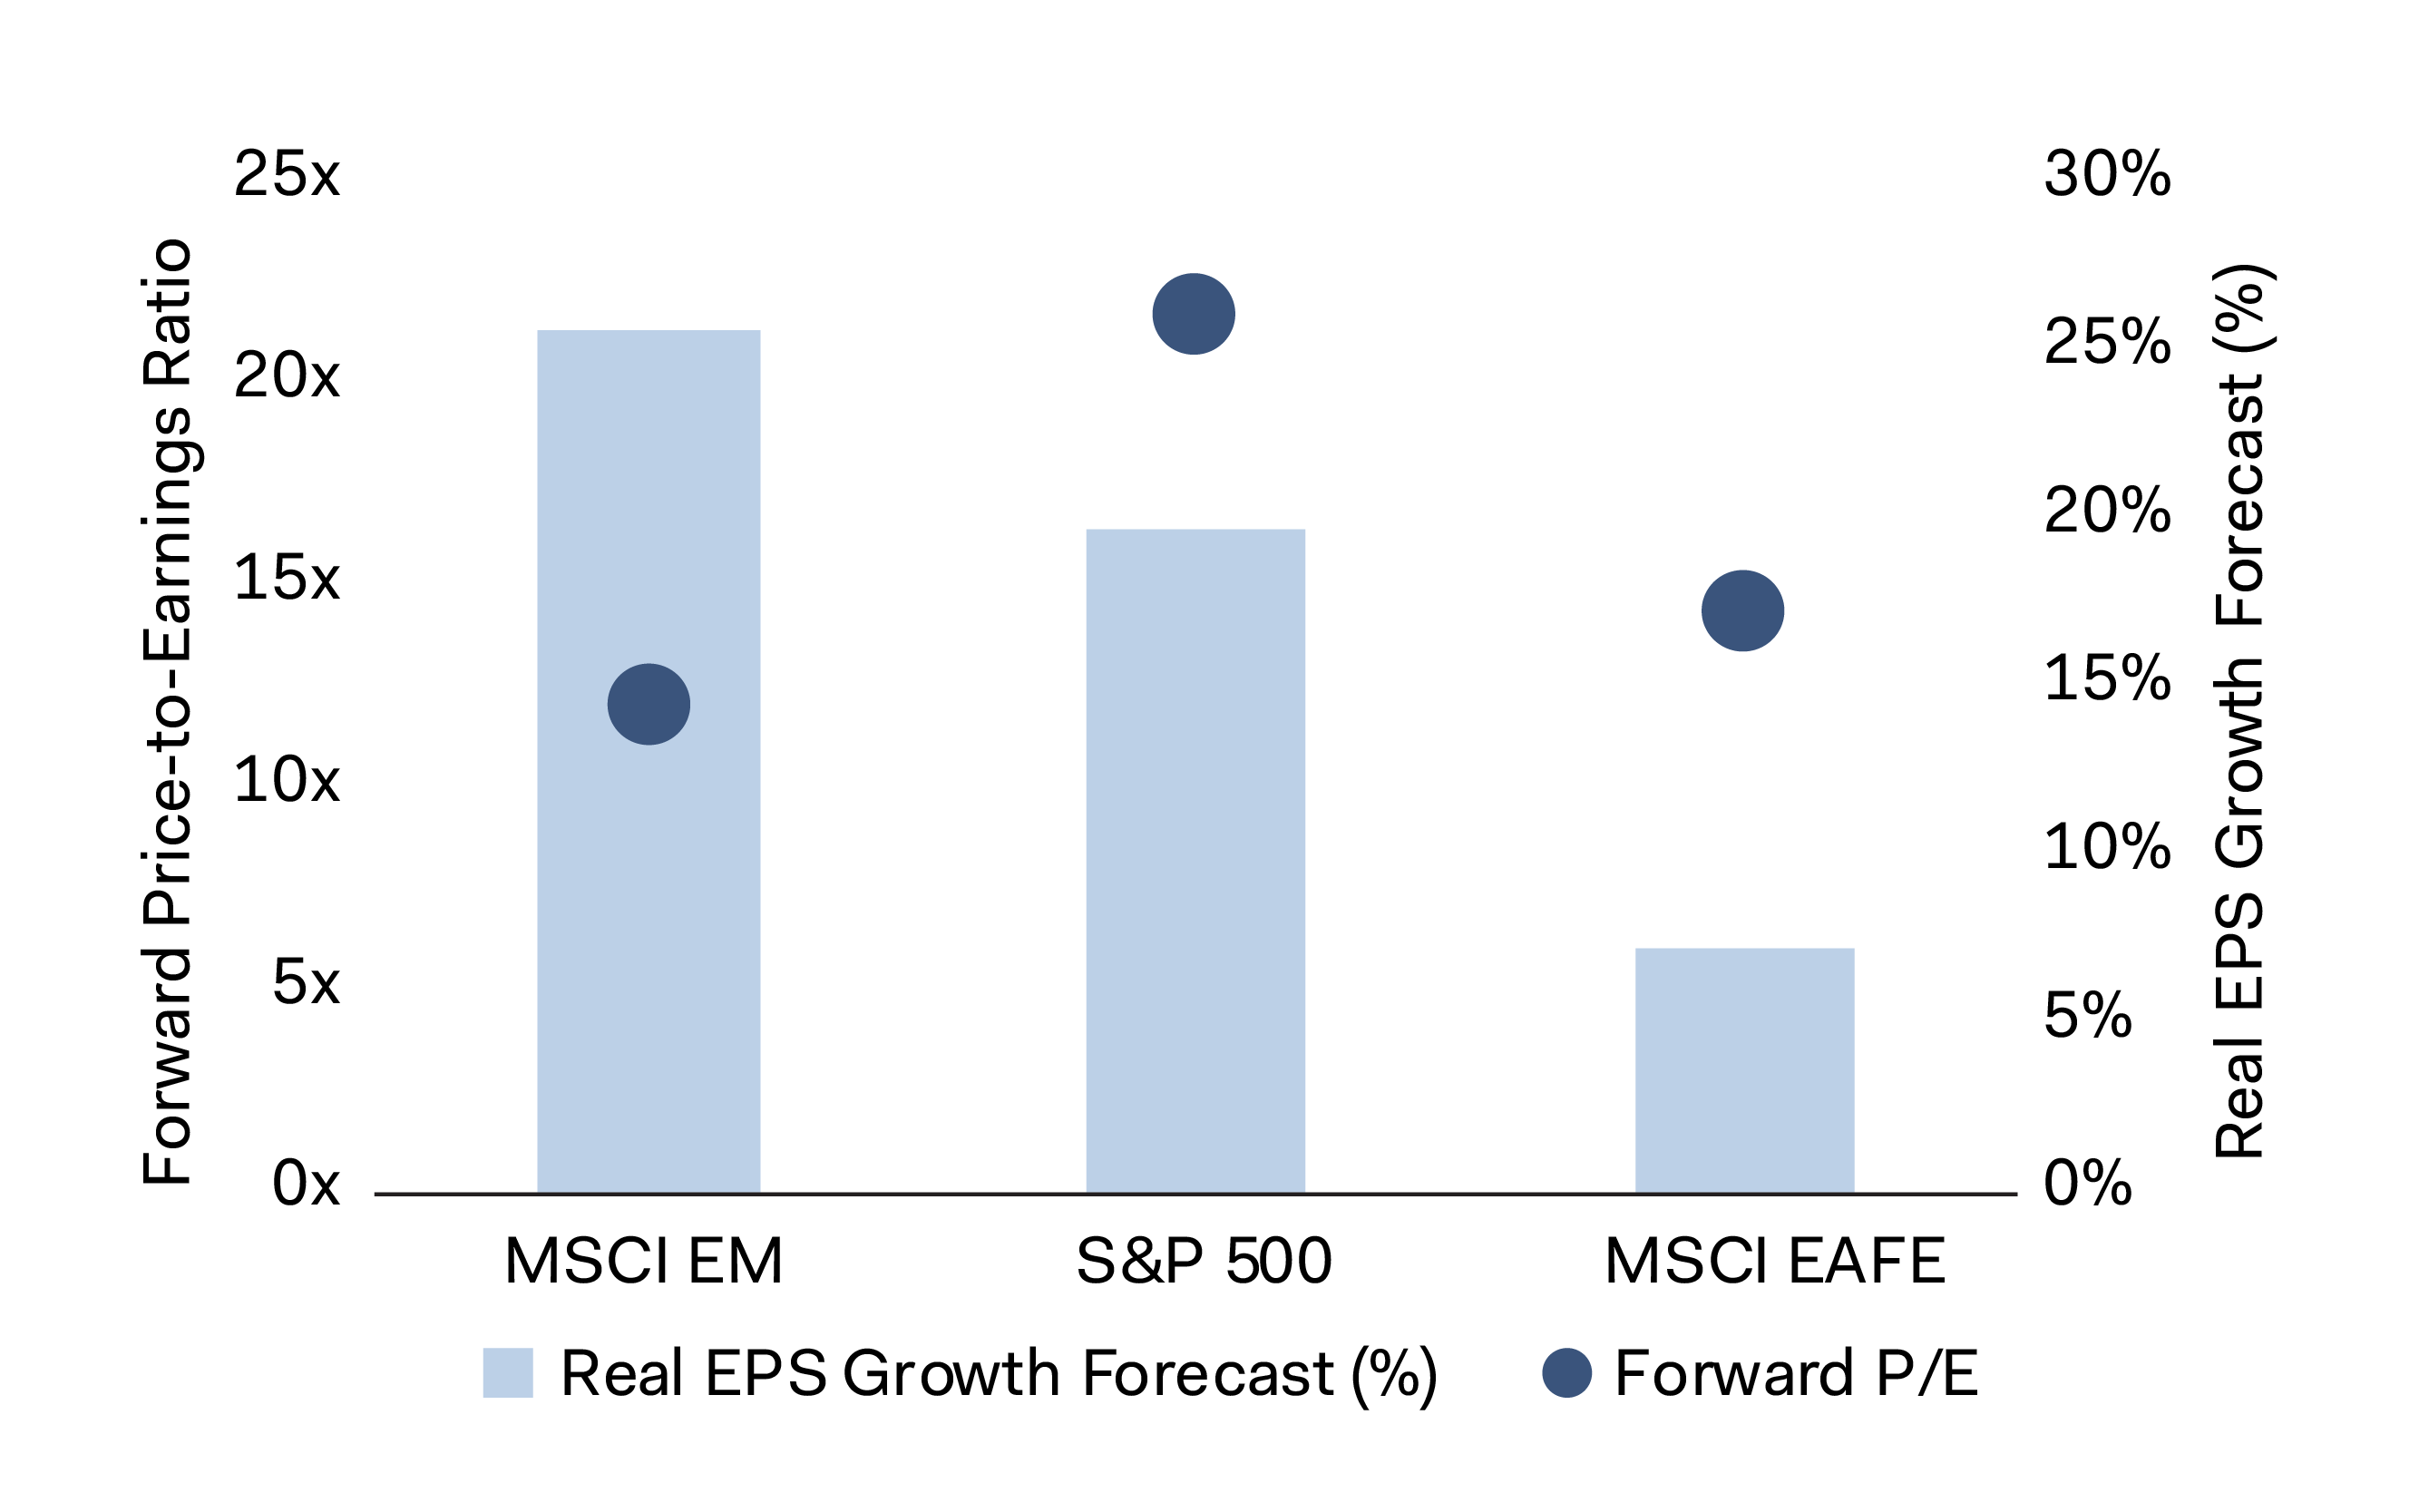 Figure 2. EM: Inexpensive with Higher Growth Prospects